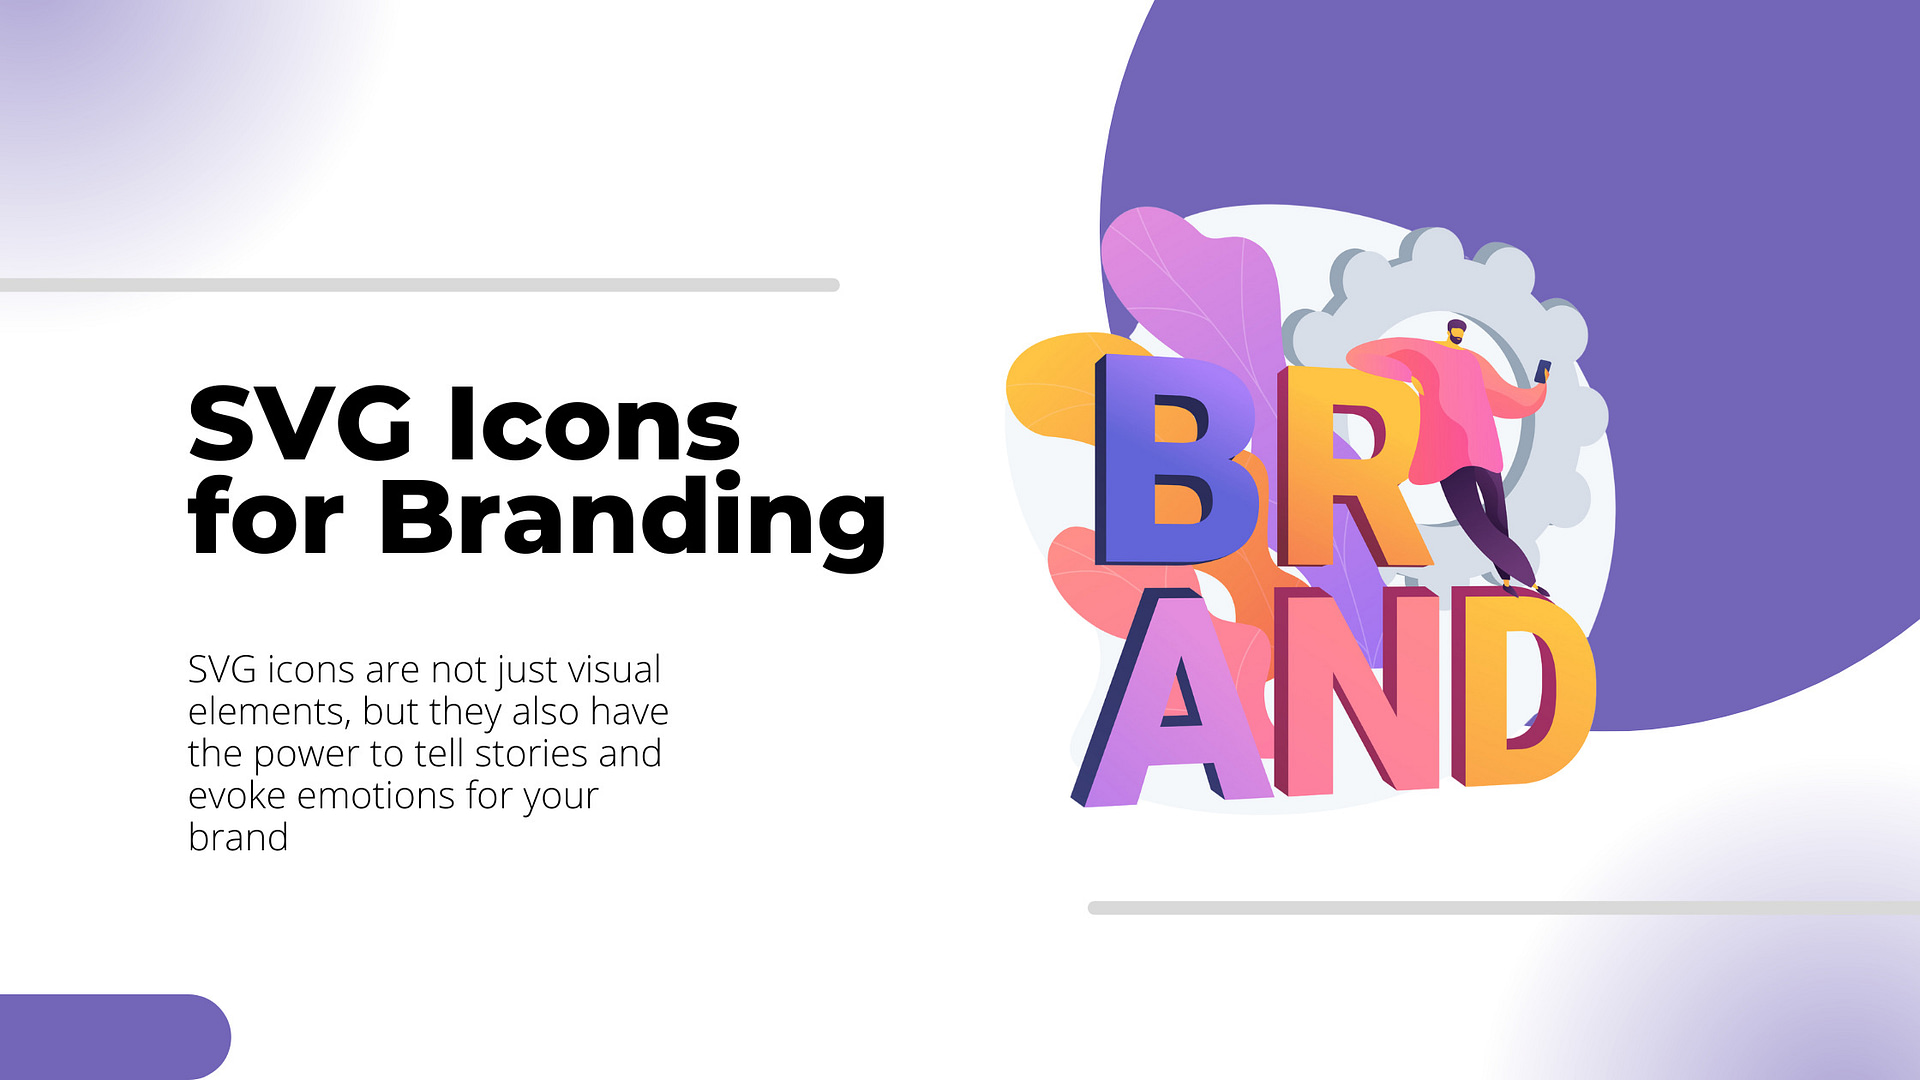 SVG icons for branding | Build a Strong Brand Identity with SVG Icons